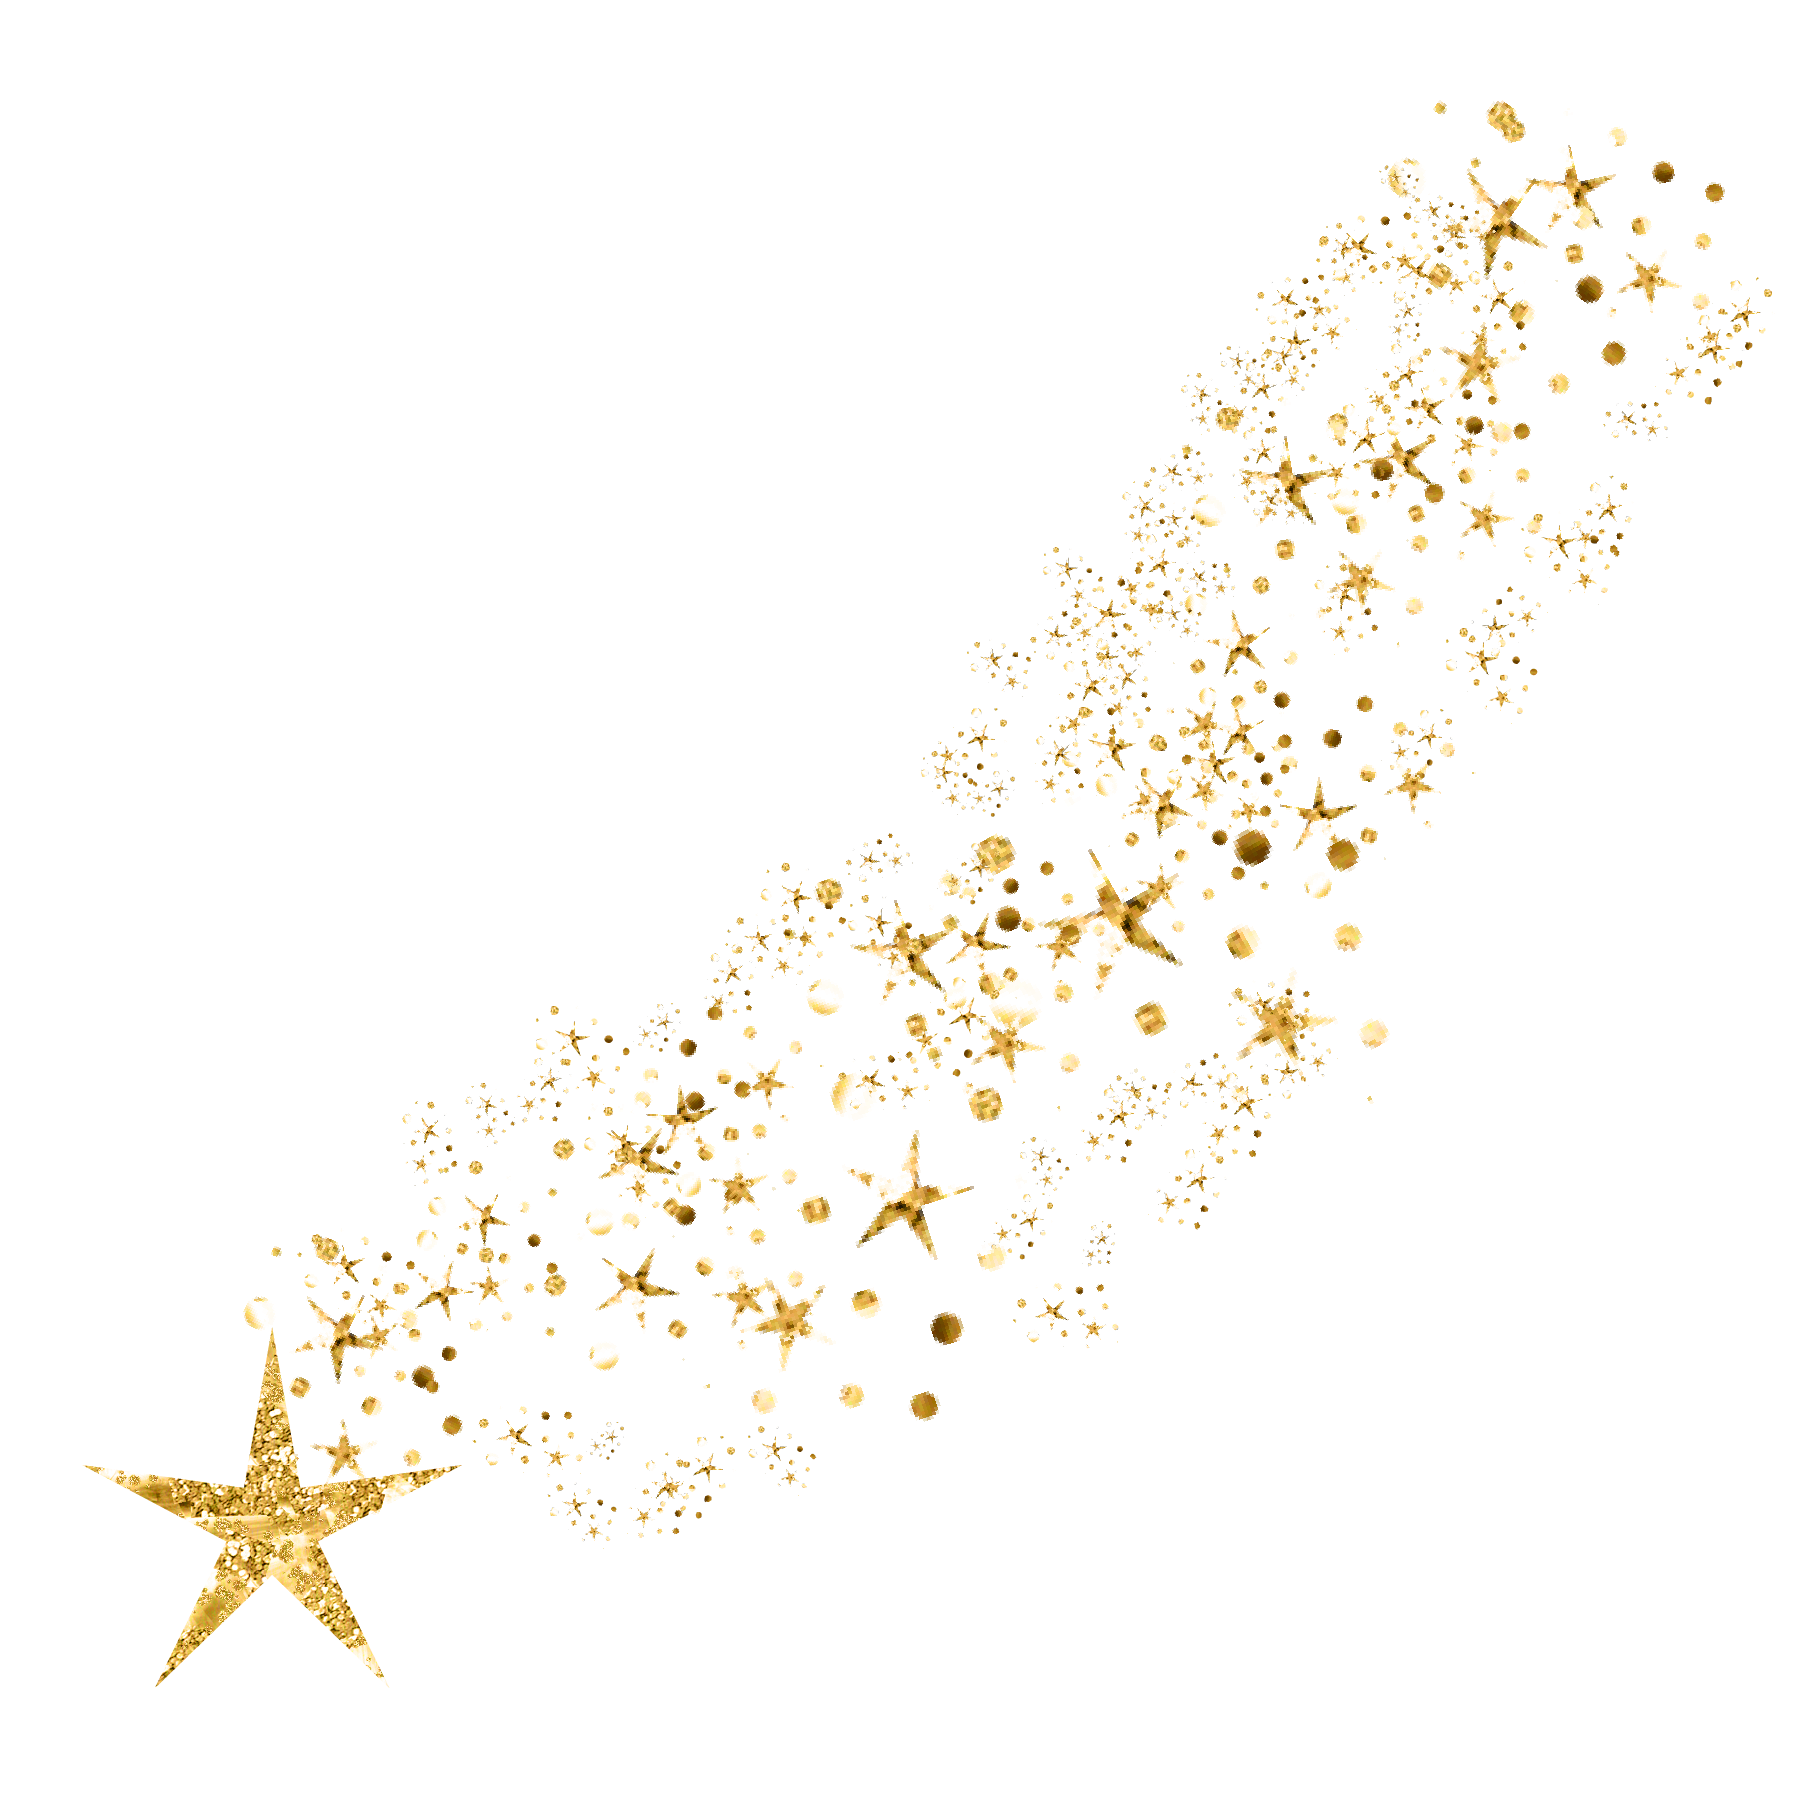 high resolution gold sparkle png